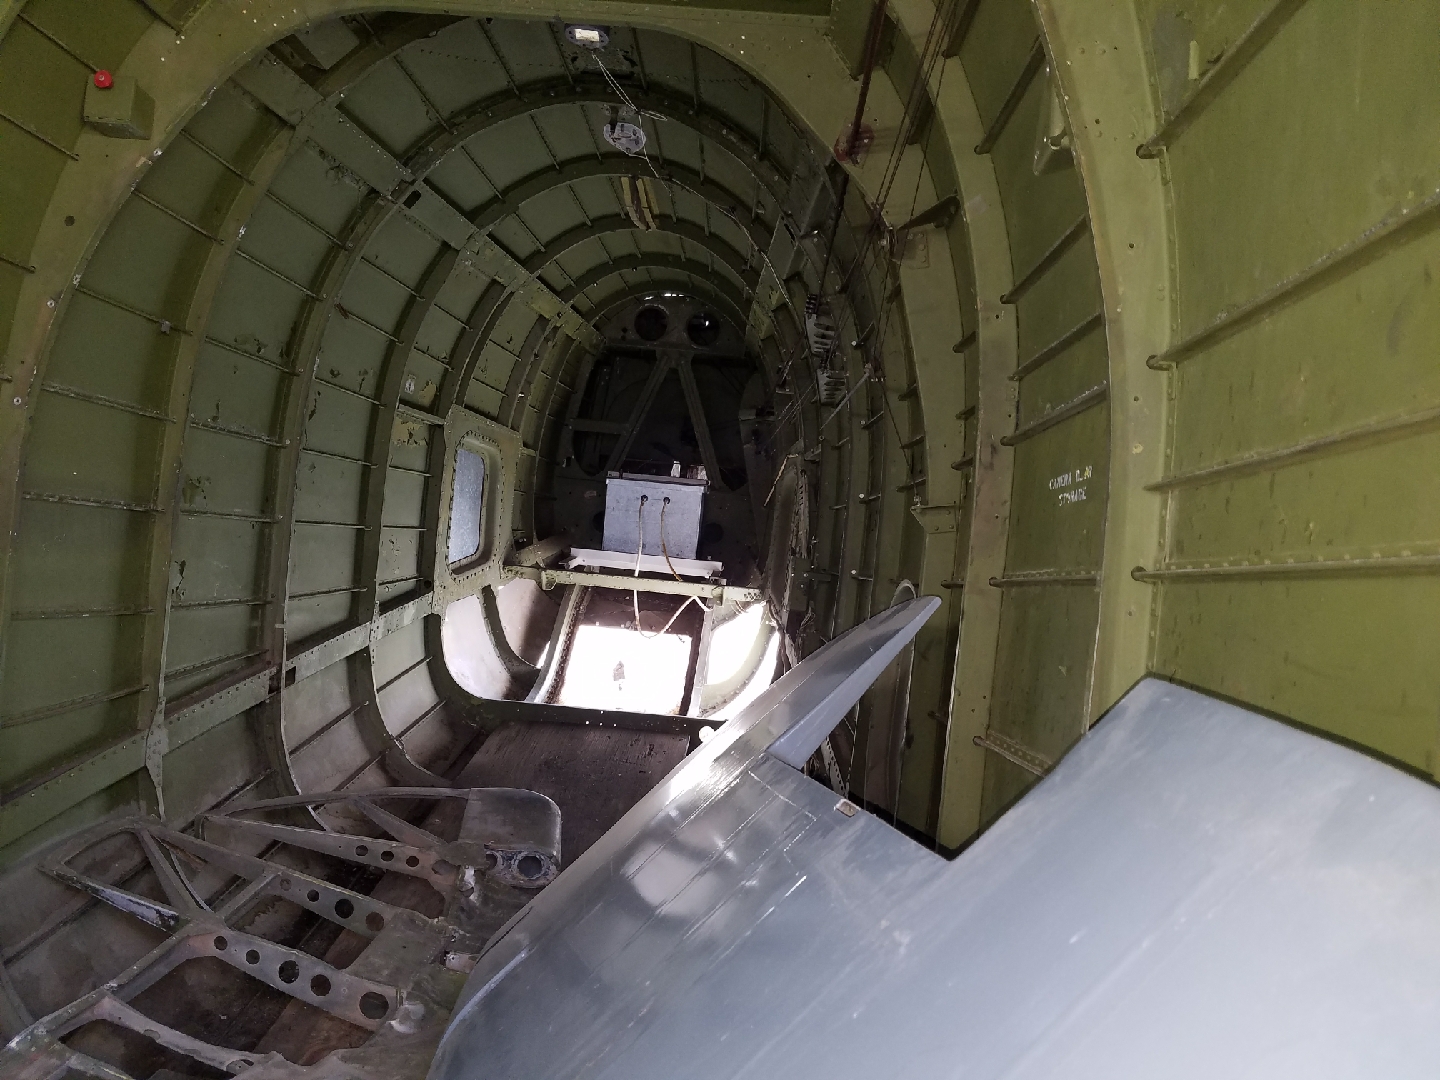 Inside the Harpoon's fuselage. You can see one of the rudders stored here in the foreground. The Vintage Aviation Museum will recover these control surfaces over the winter to help prepare the aircraft for a ferry flight to their base near Salt Lake City, Utah for more extensive repairs. (photo via Vintage Aviation Museum) 